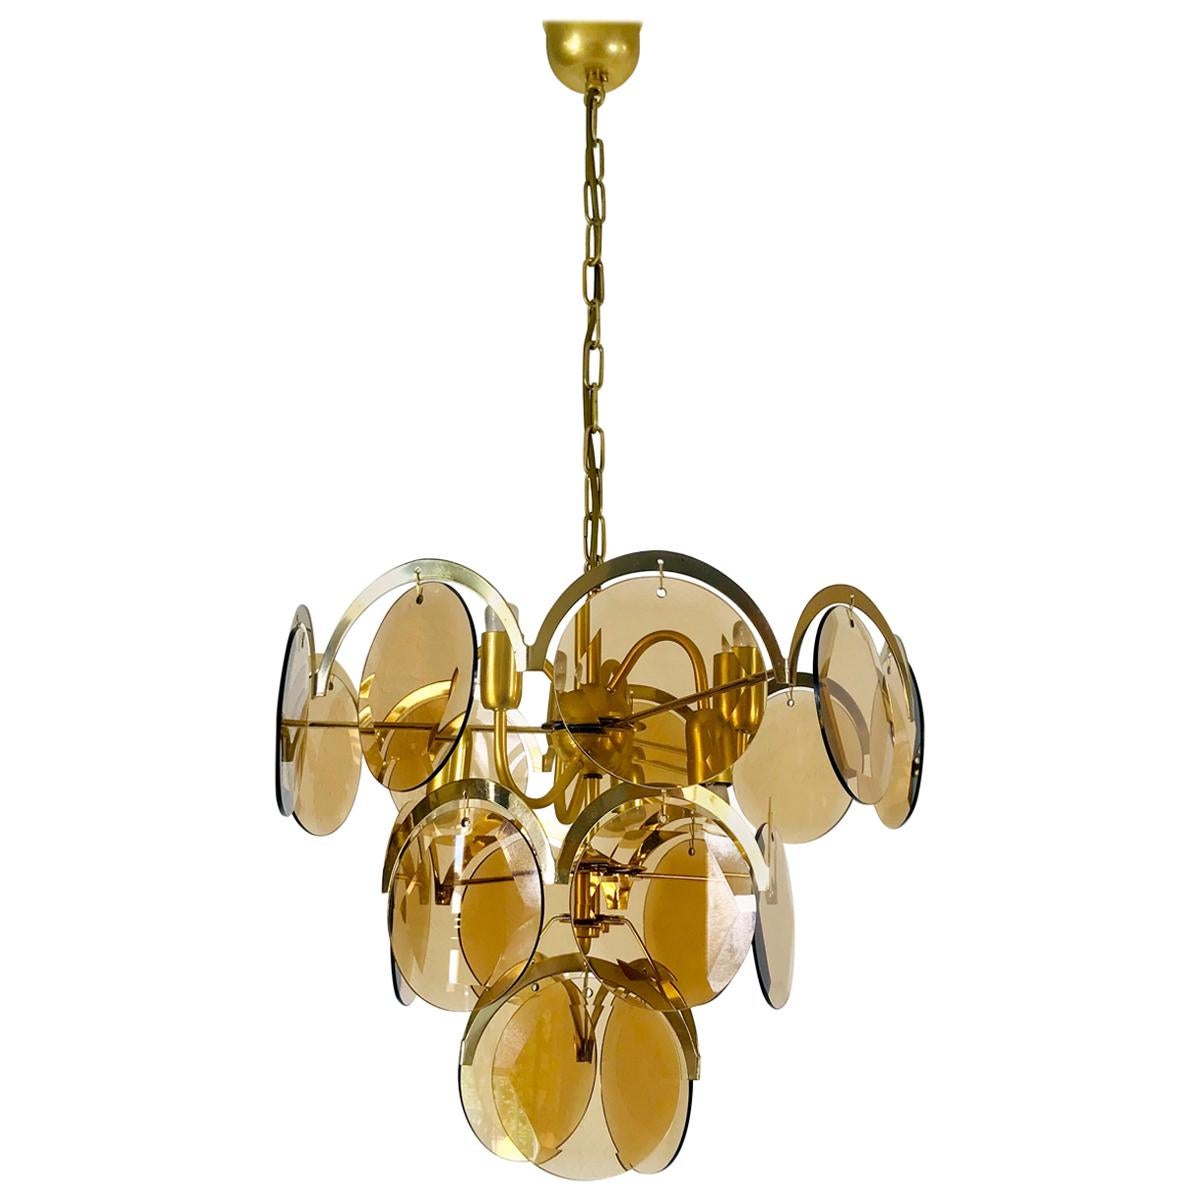 Midcentury Three-Tier Brass and Glass Chandelier by Vistosi, 1960s For Sale